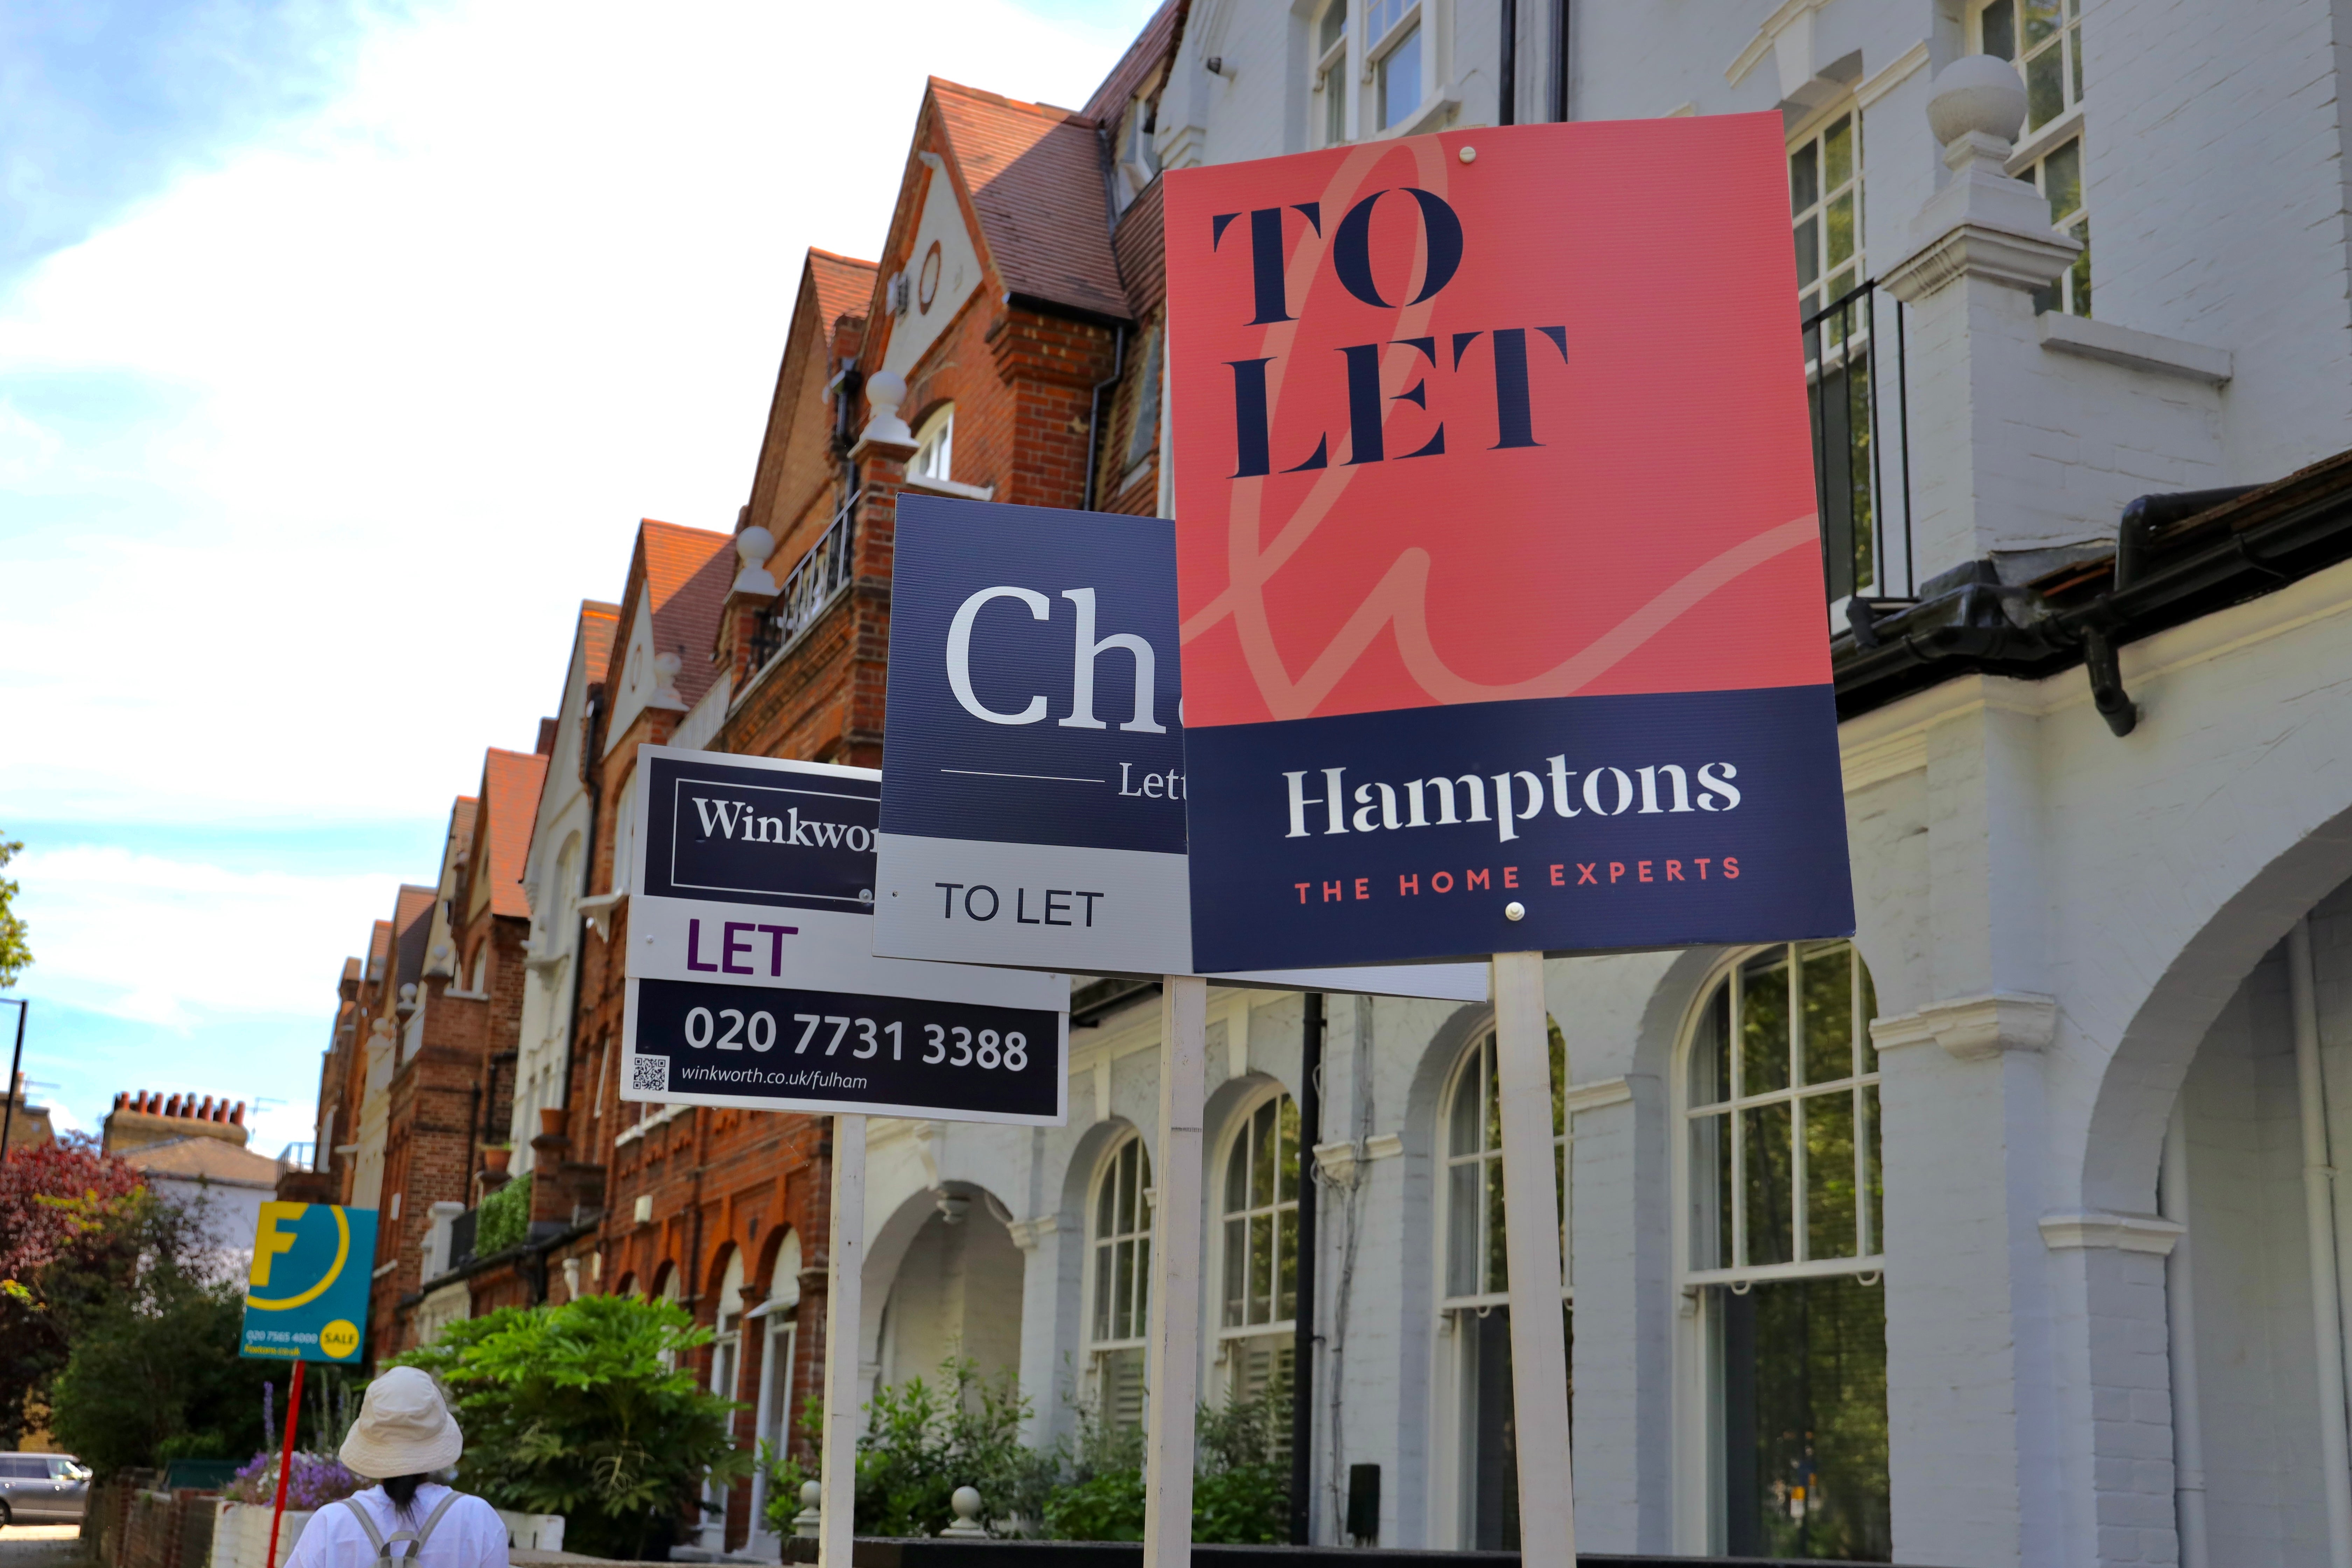 New research reveals full extent of landlords’ exit from private rental market